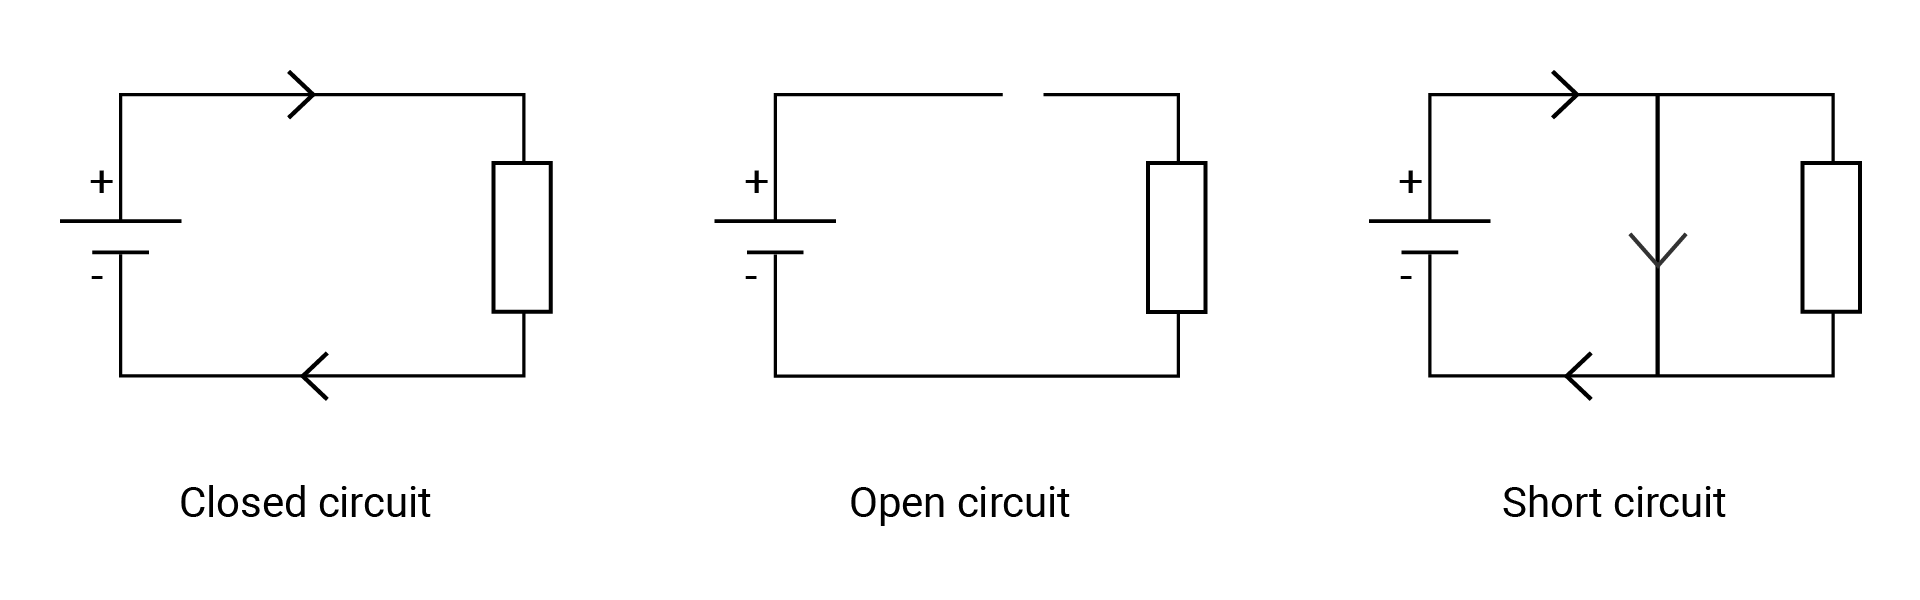 Open, closed and short circuits